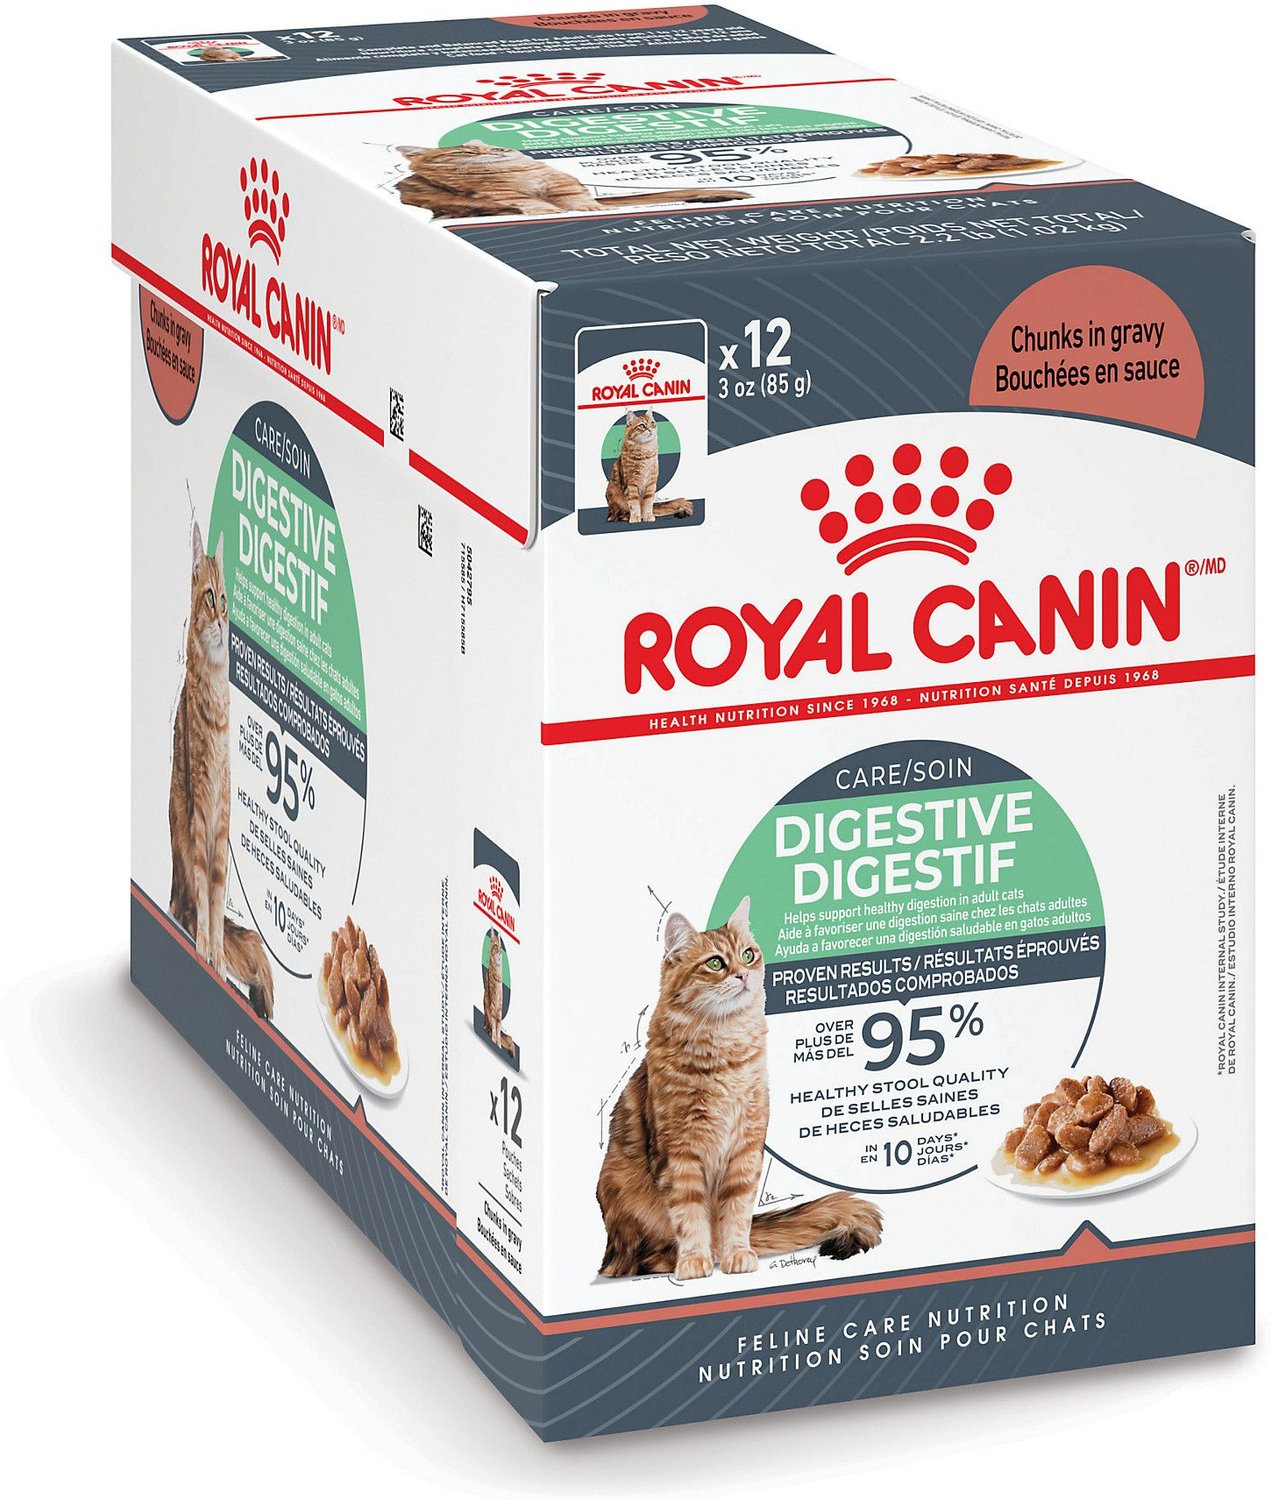 ROYAL CANIN Digest Sensitive Chunks in Gravy Adult Cat Food Pouches, 3